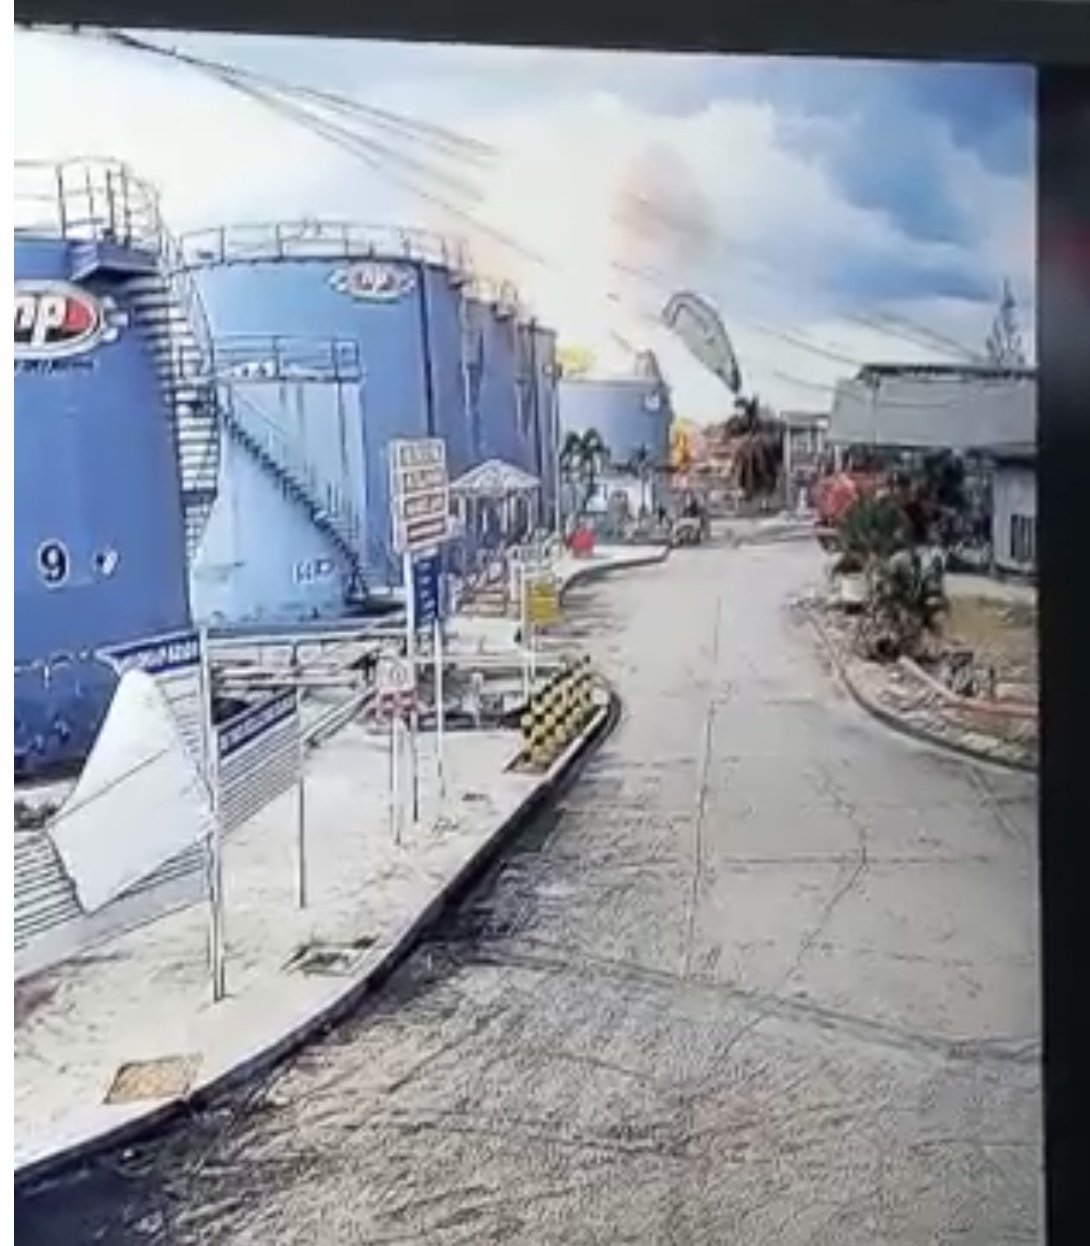 New Video of explosion at NP Fuel storage